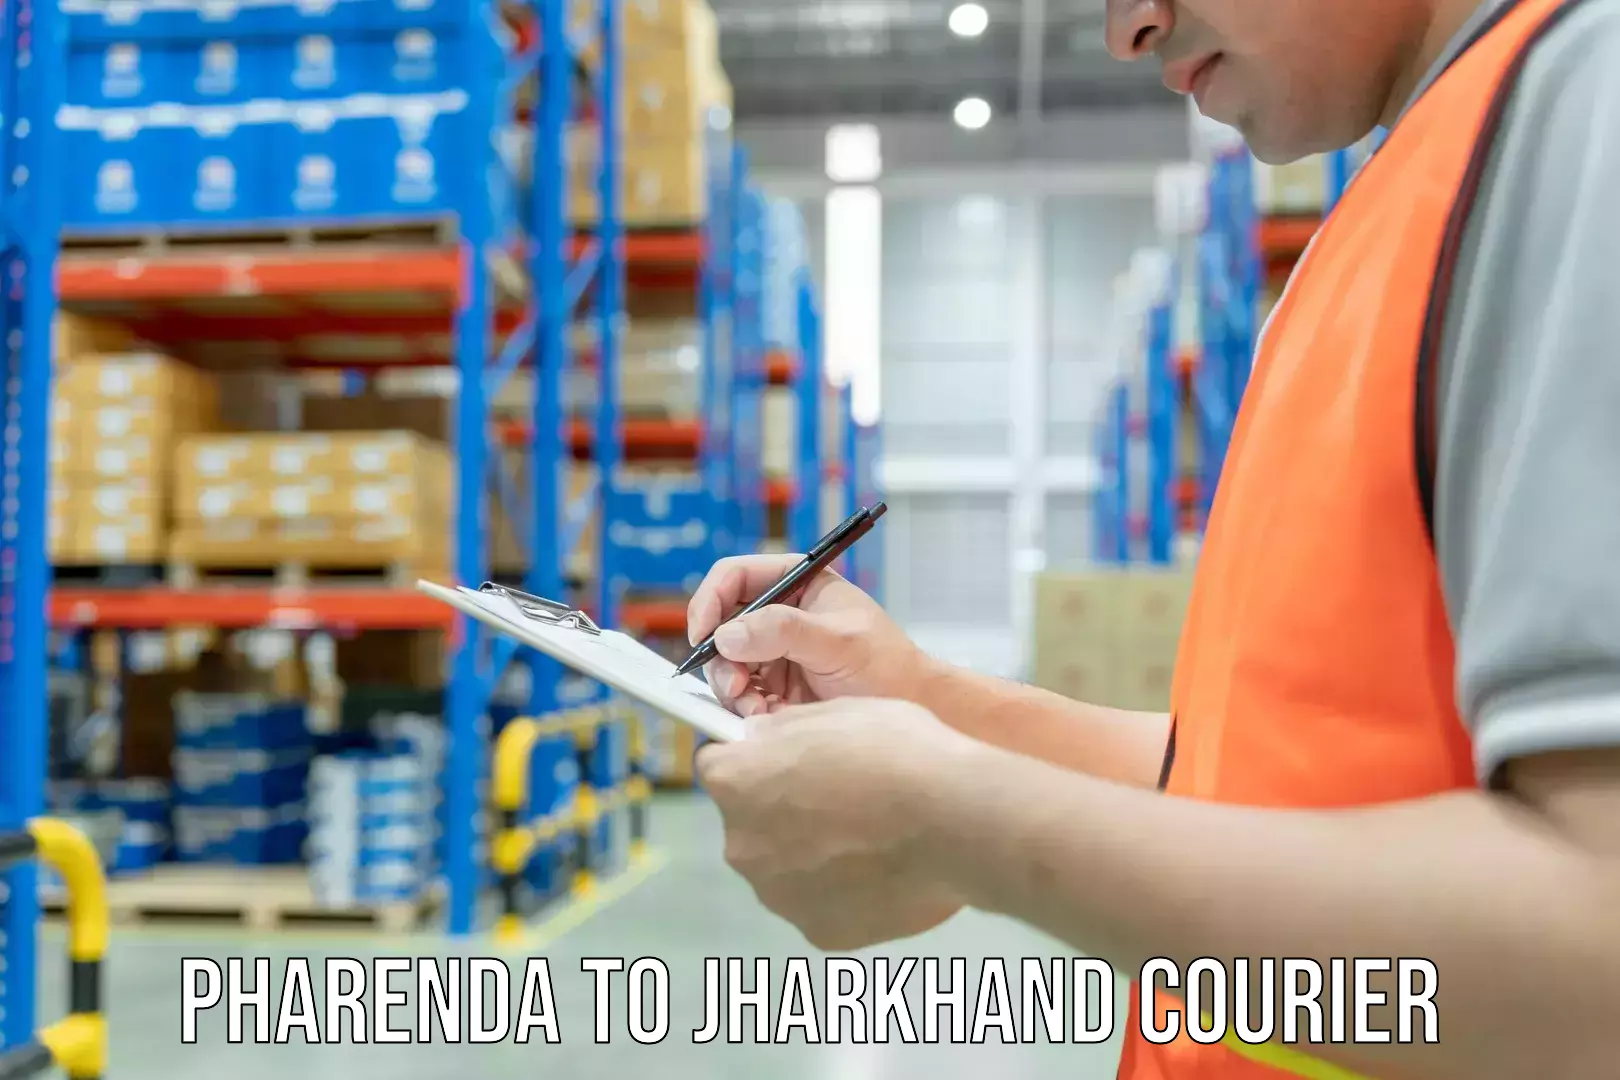 Furniture relocation experts Pharenda to Jharkhand